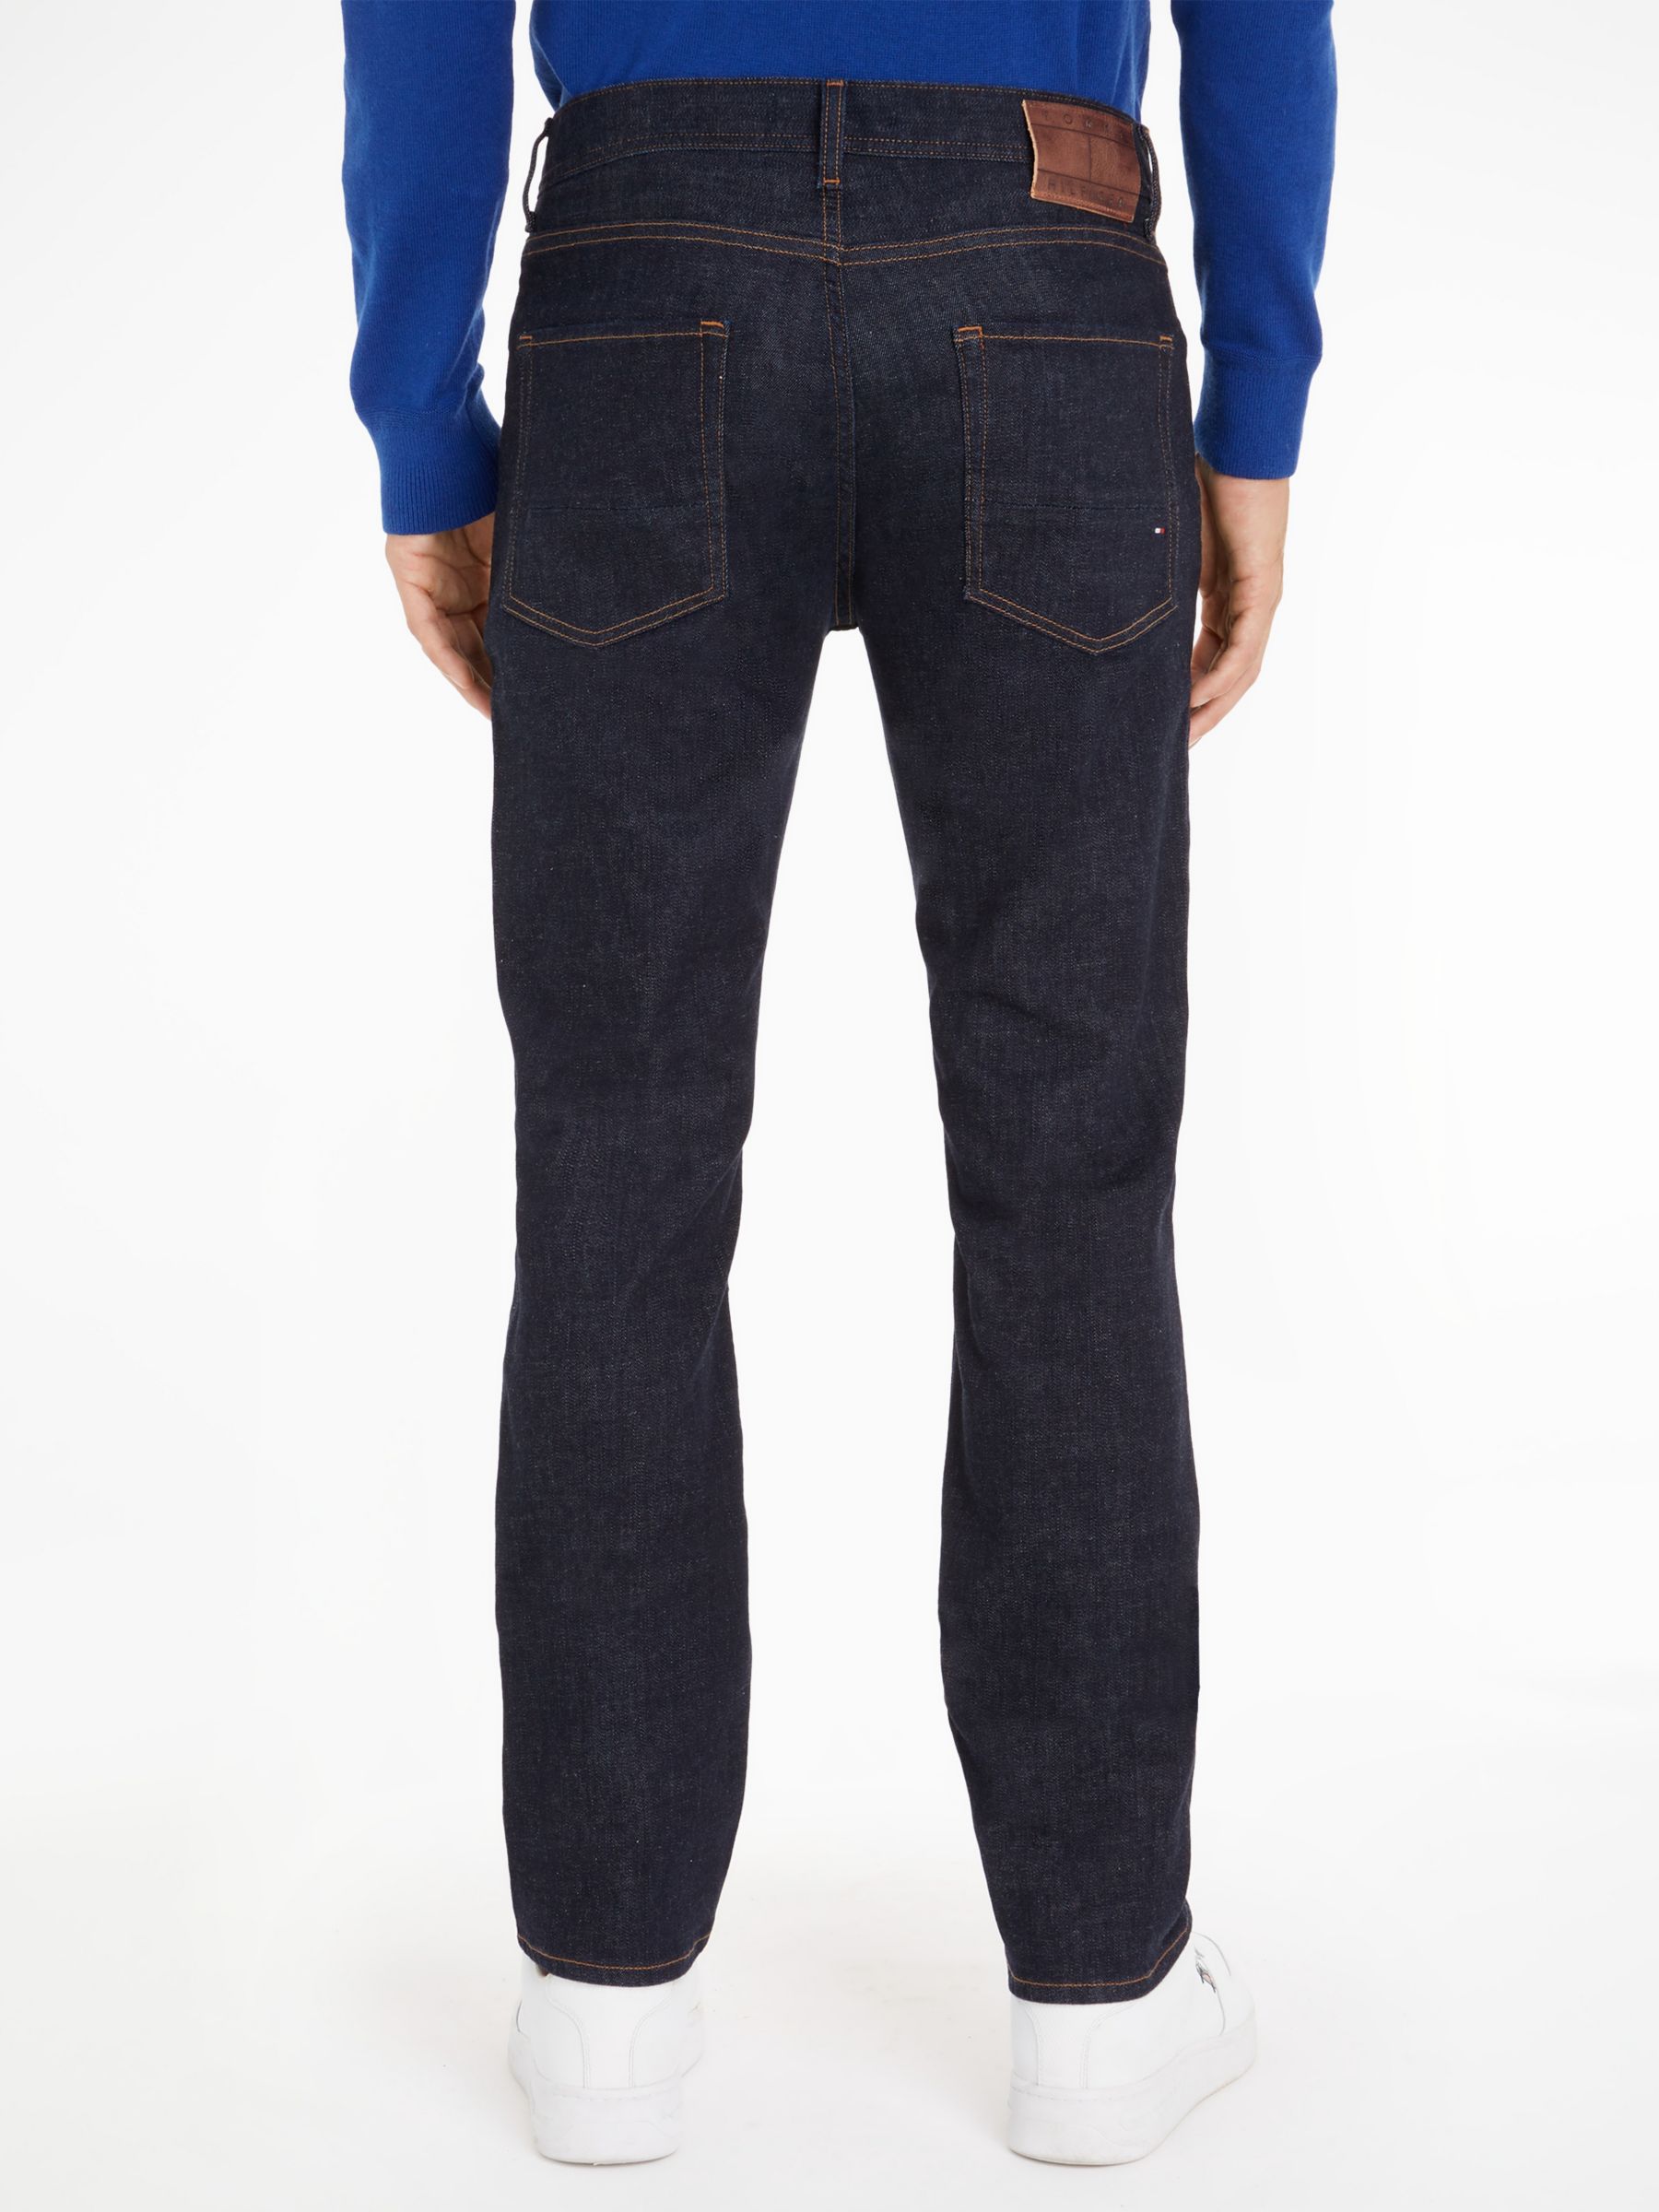 Tommy Hilfiger Denton Straight Jeans, Ohio Rinse at John Lewis & Partners